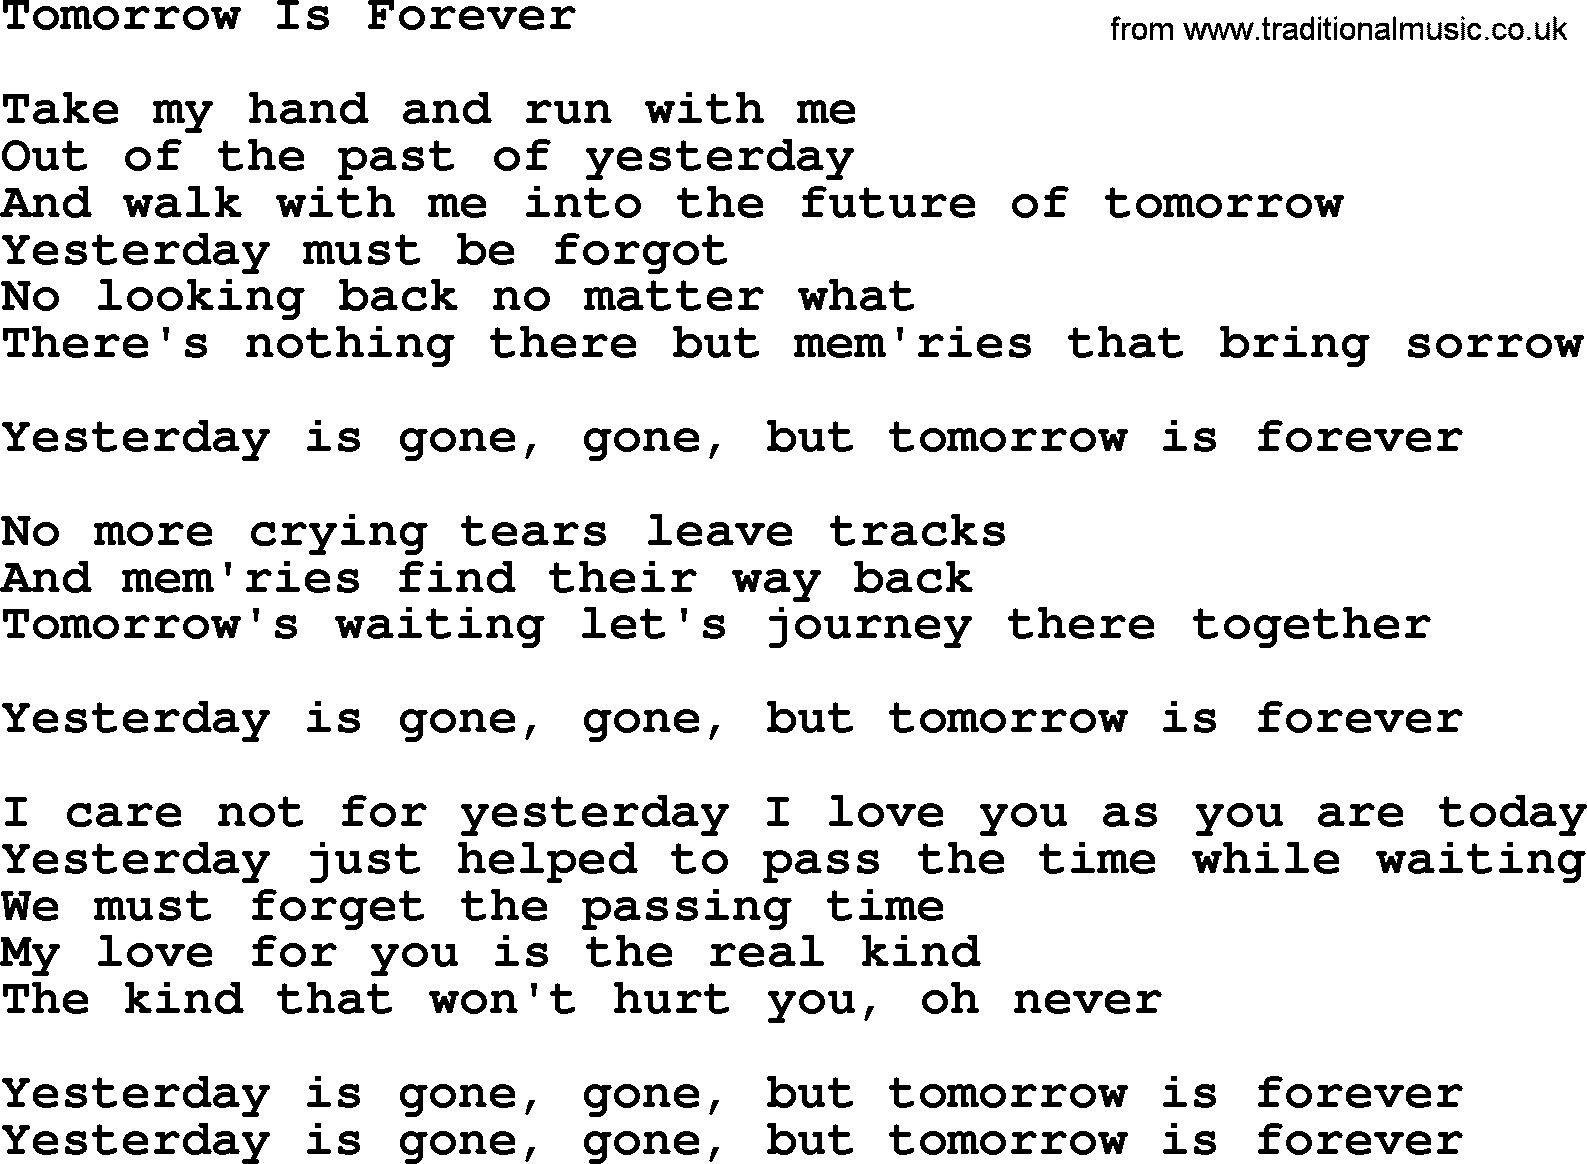 Dolly Parton song Tomorrow Is Forever.txt lyrics